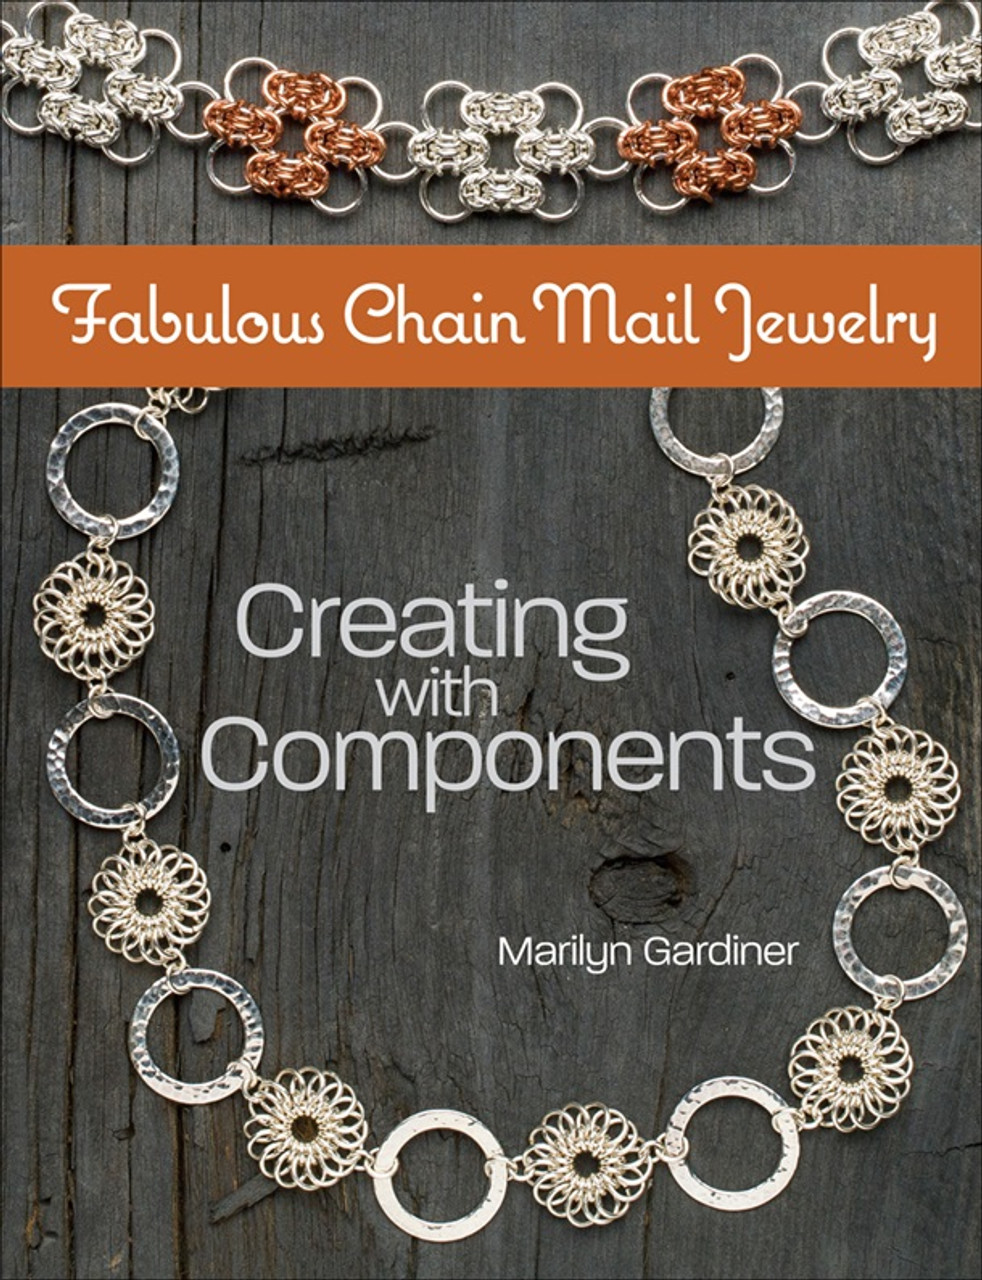 Blog :: News! :: Chains Guide for Jewelry Making: Materials